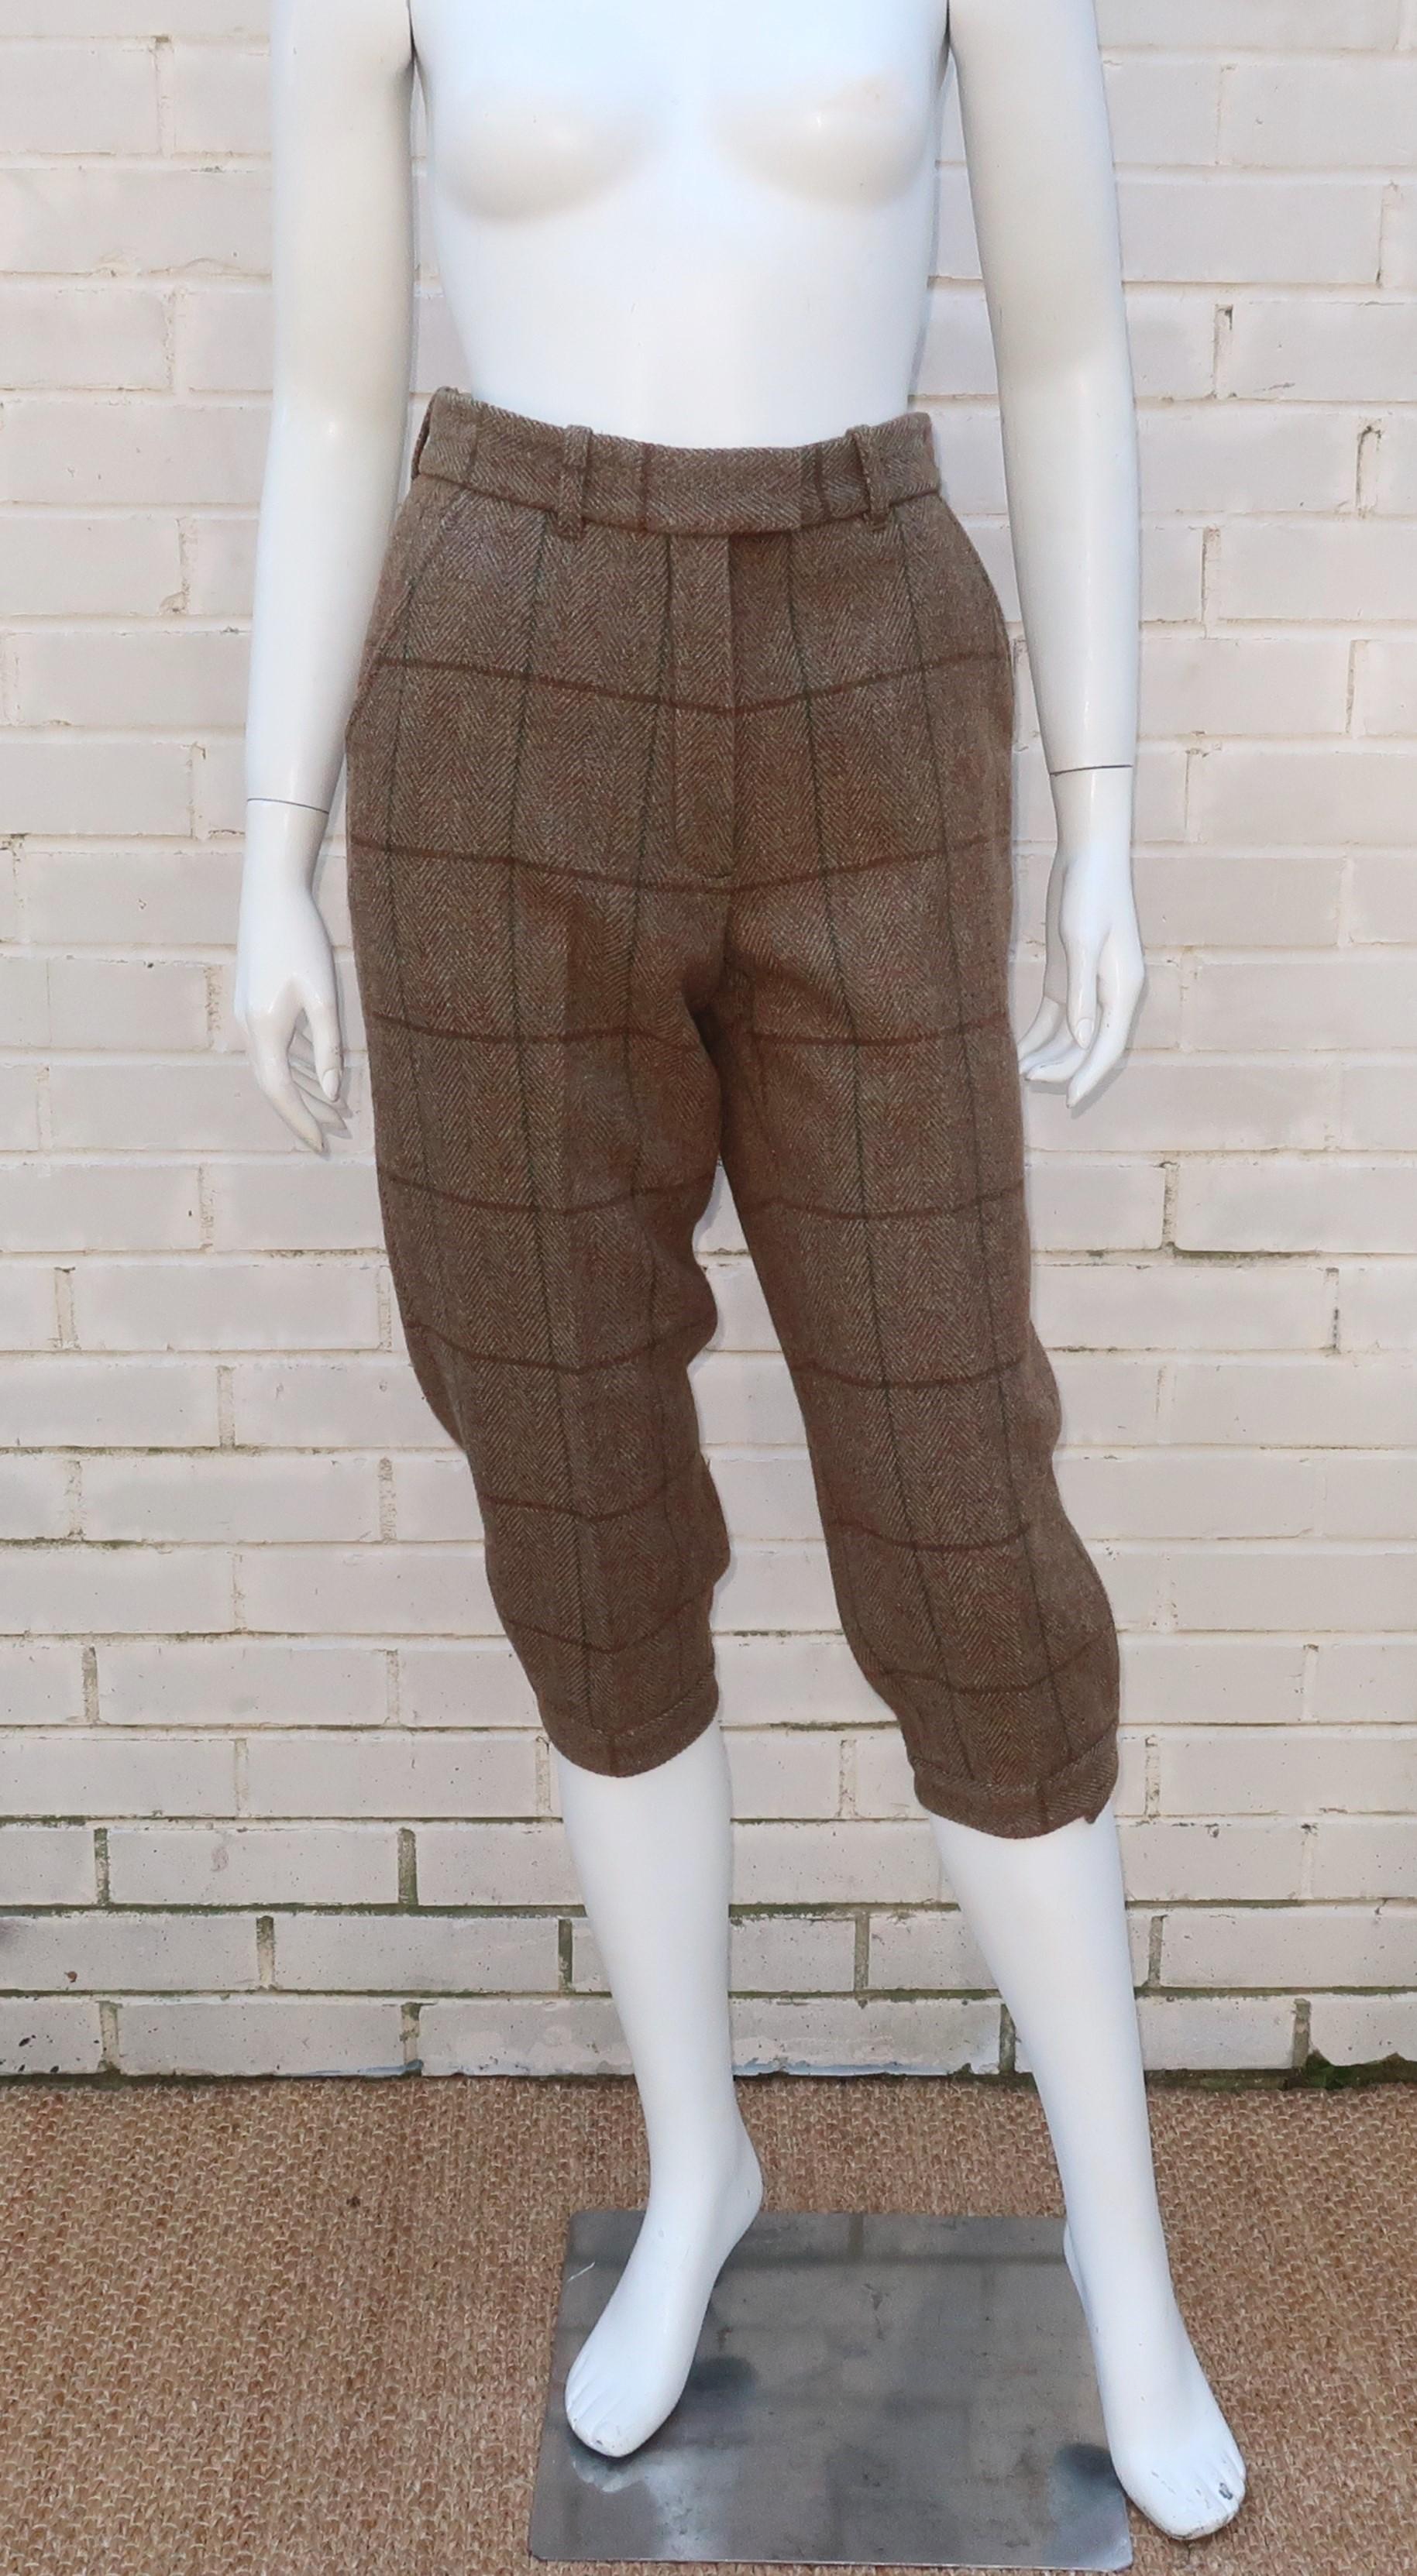 English hunting style at its best!  A classic pair of brown wool knicker pants by iconic British gun maker, Holland & Holland.  The firm was purchased by Chanel in the late 1980's with a desire to produce not only bespoke hunting rifles but also